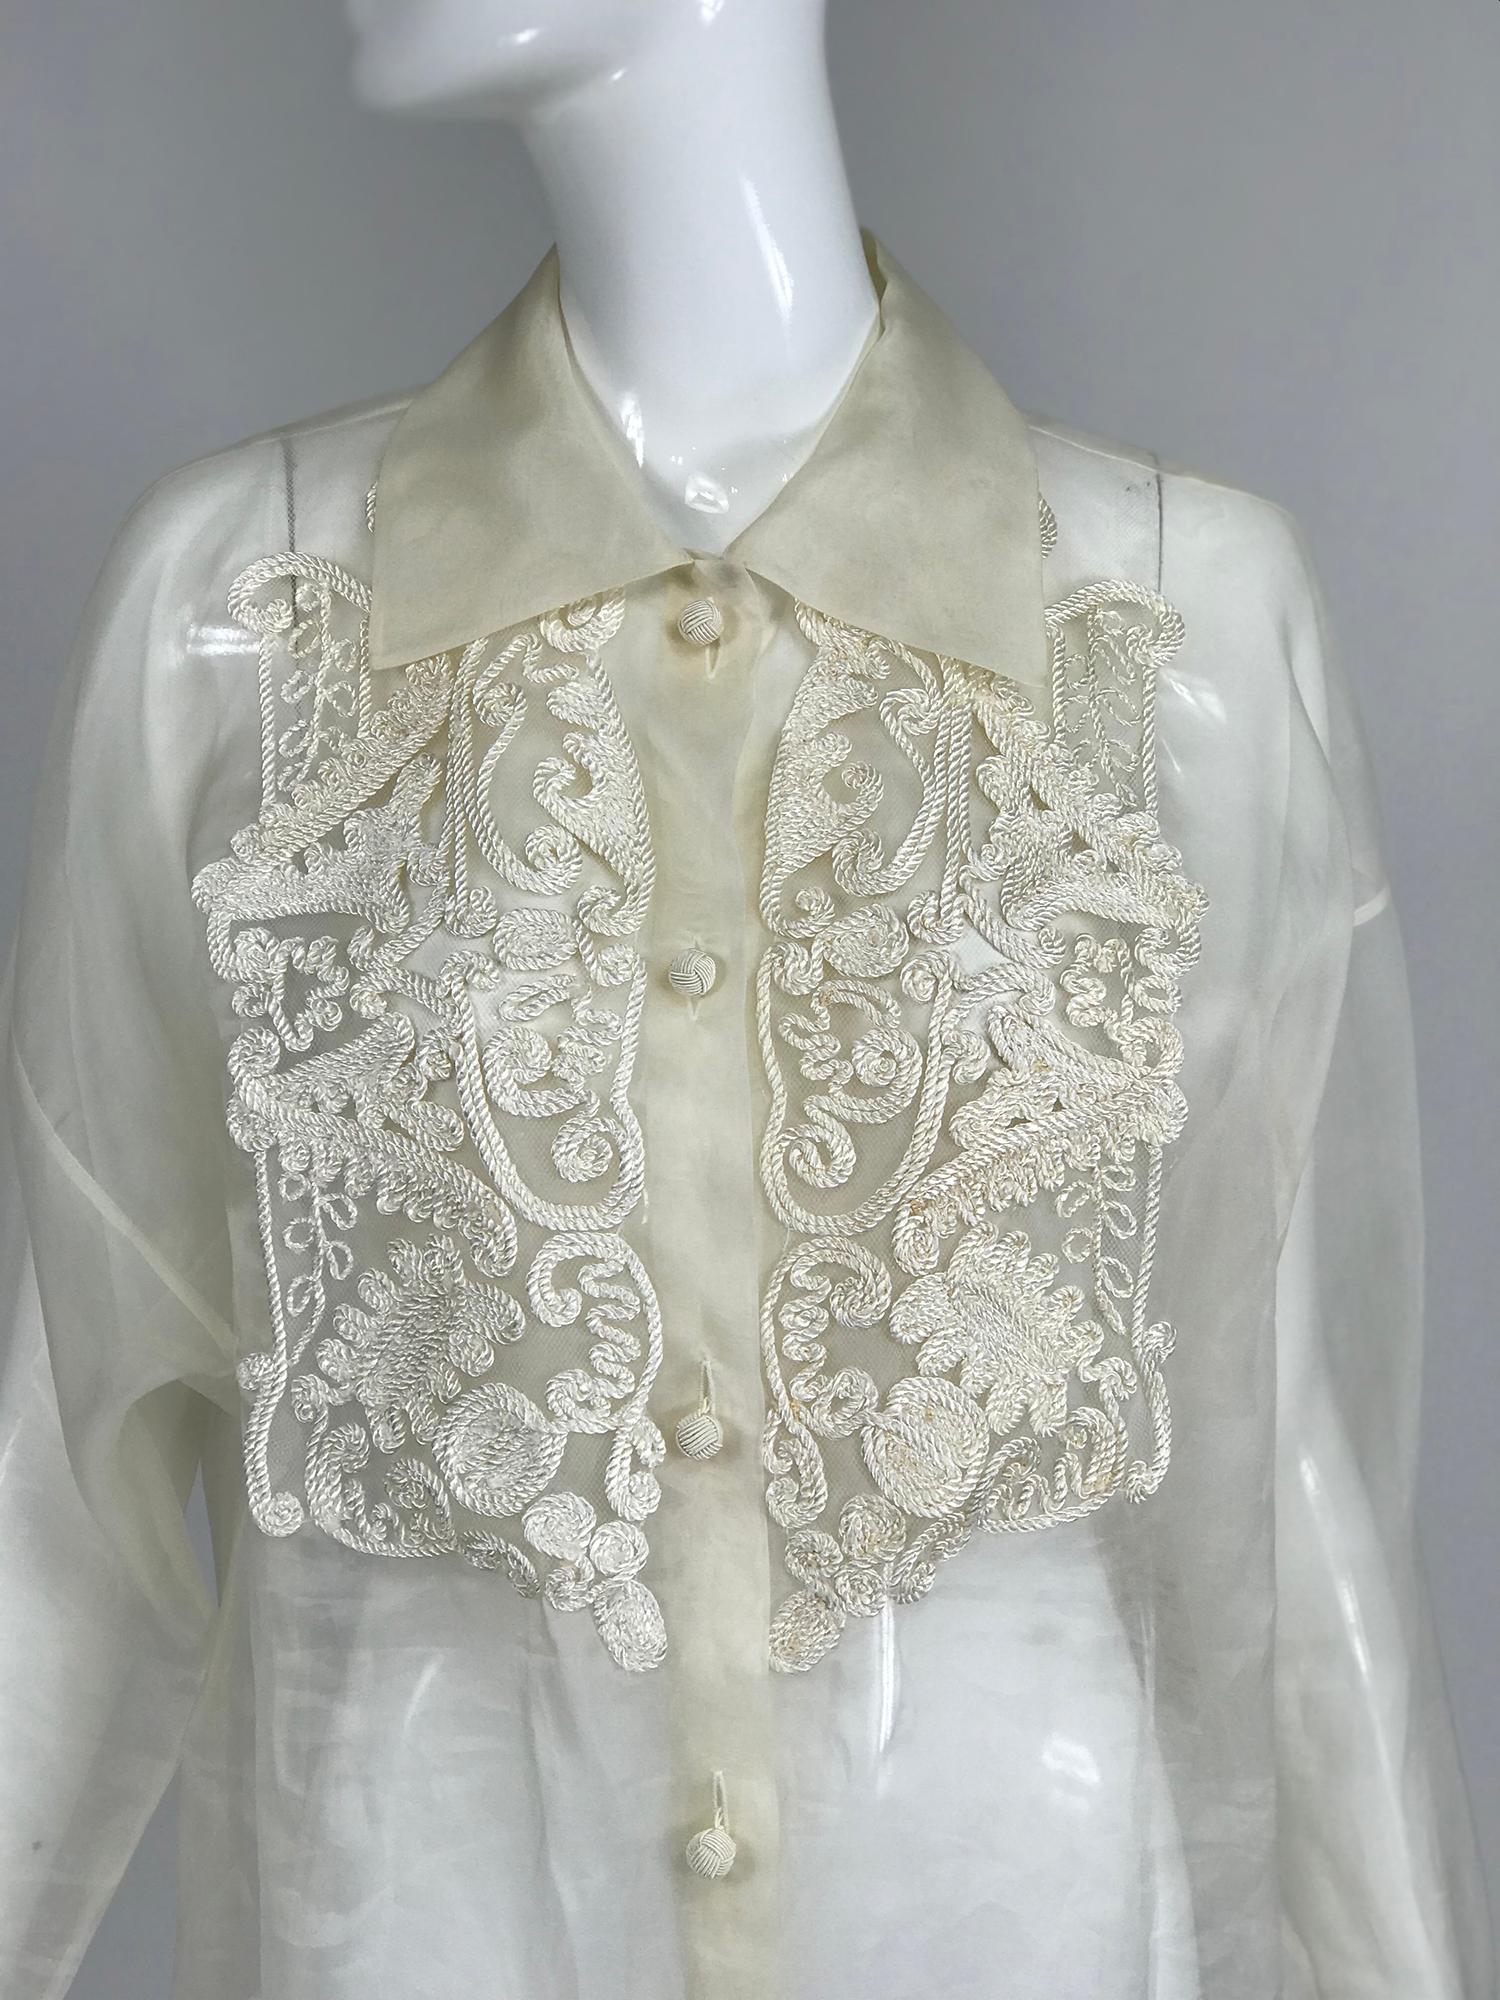 Off white sheer silk organza passementerie long sleeve tunic blouse from the 1990s. This beautiful blouse is very sheer and see through, you may want add a camisole. The cord work passementerie forms a bib front. The blouse closes with cord work